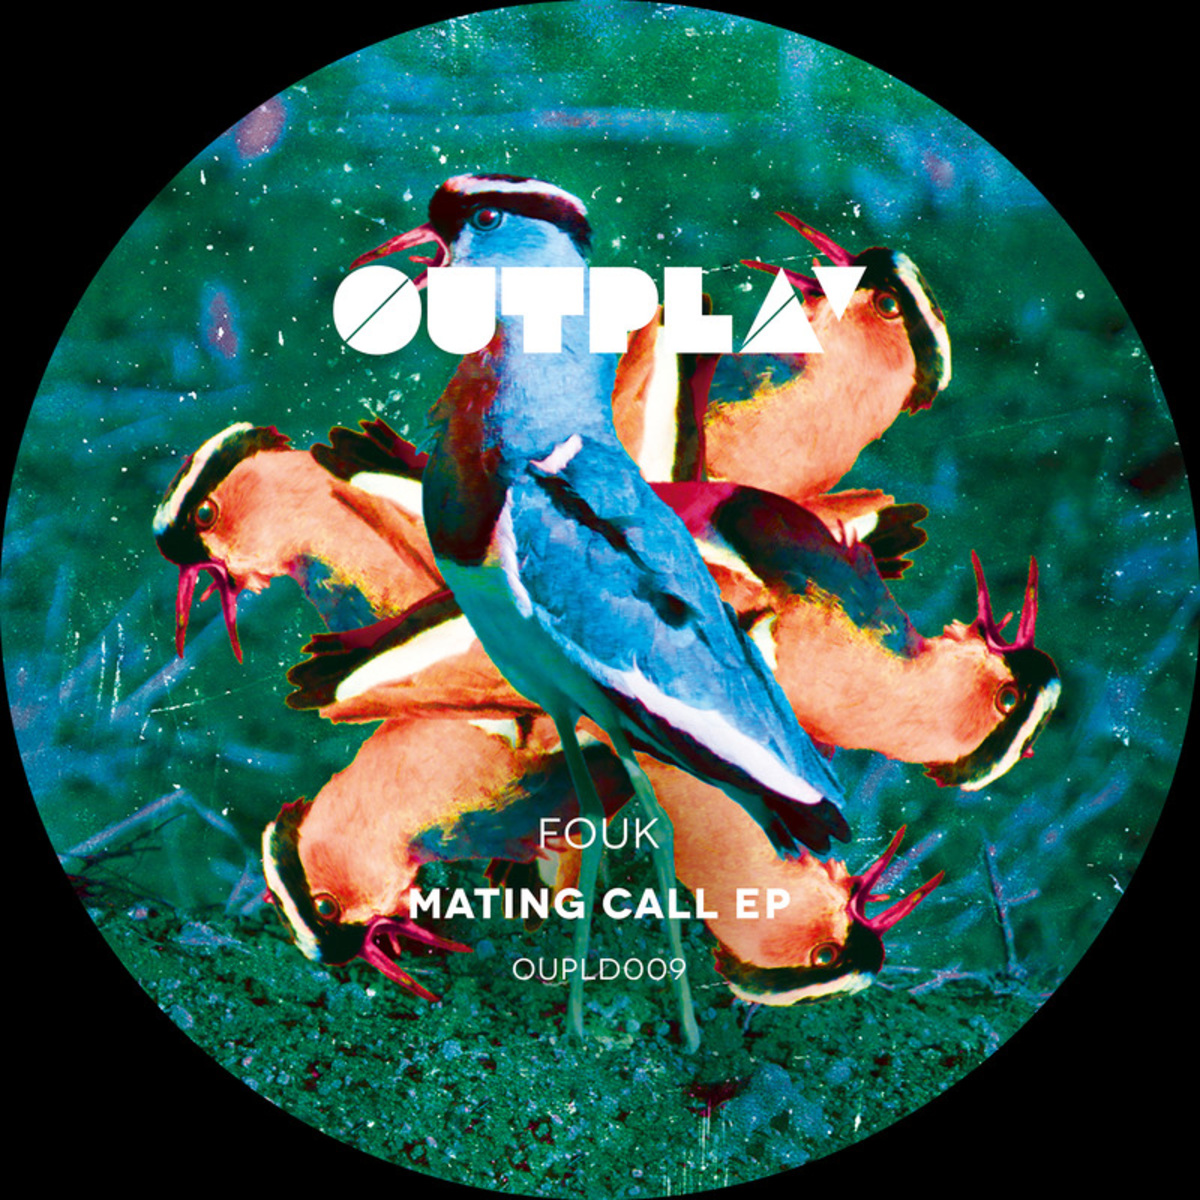 Fouk - Mating Call EP / Outplay